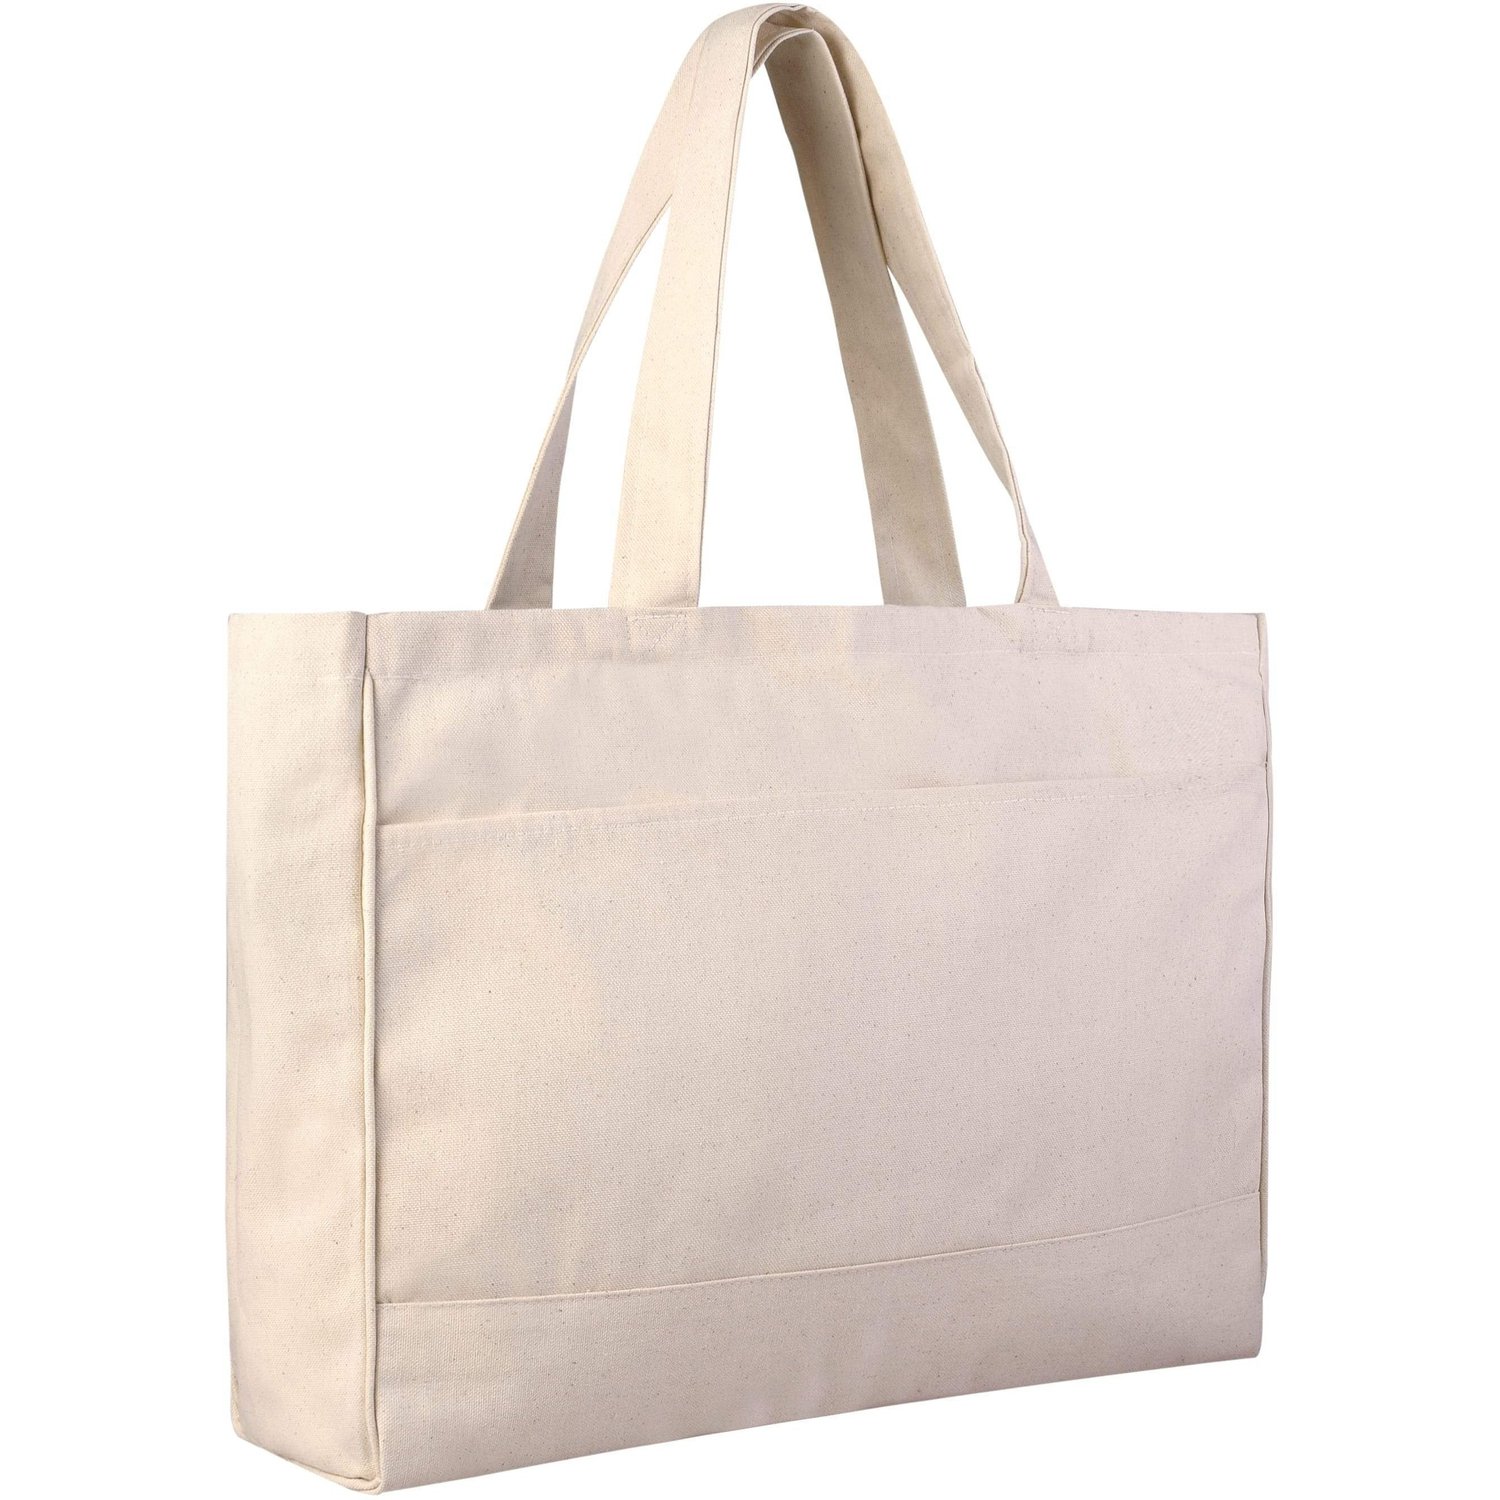 Wholesale Cotton Bags | Promotional Printing and Design